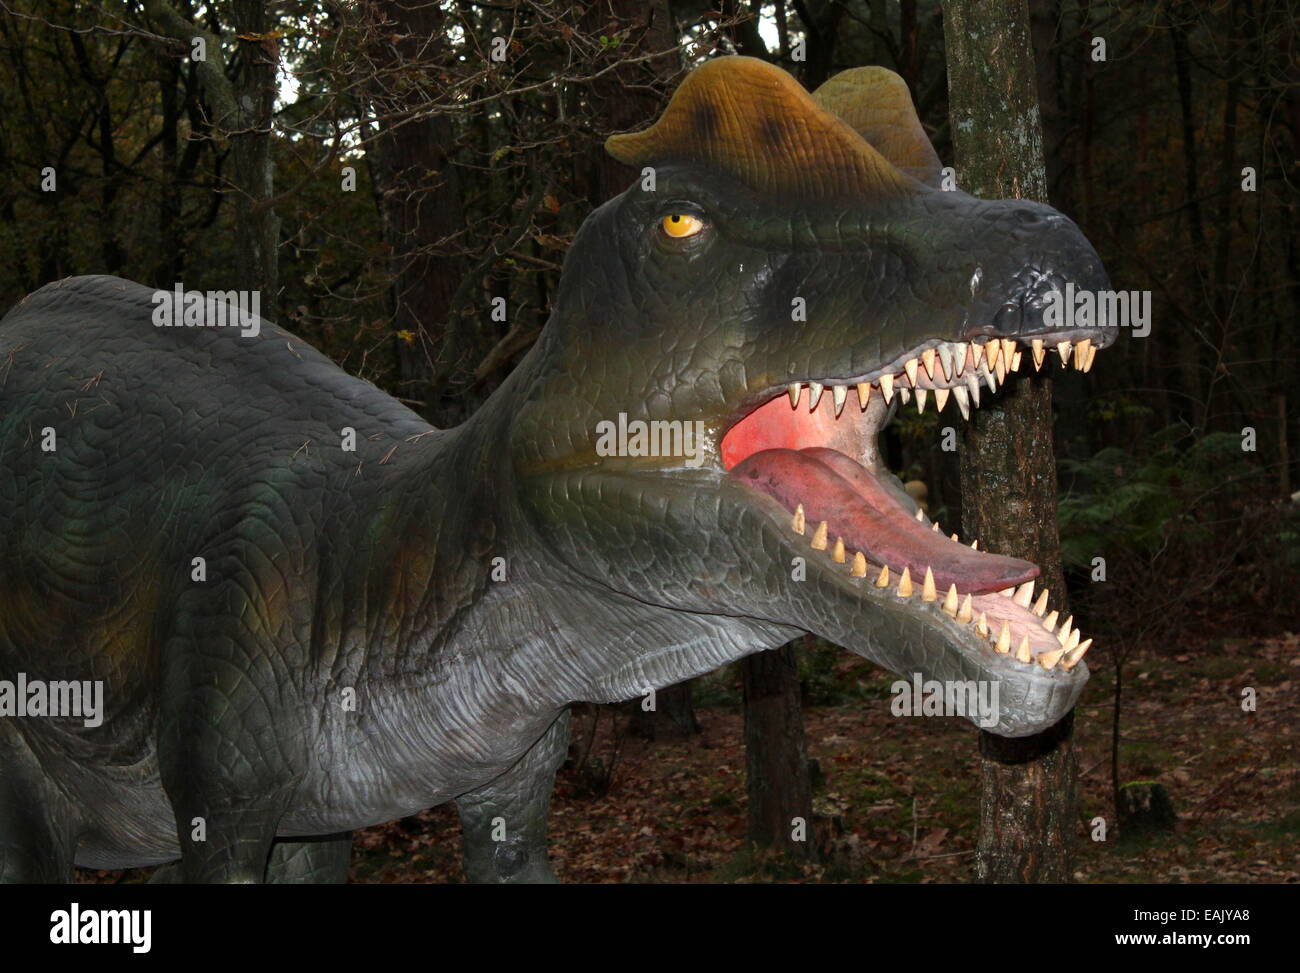 Model of a Dilophosaurus from the Jurassic era. Full-size and lifelike dino statue at  Dinopark Amersfoort Zoo, The Netherlands. Stock Photo